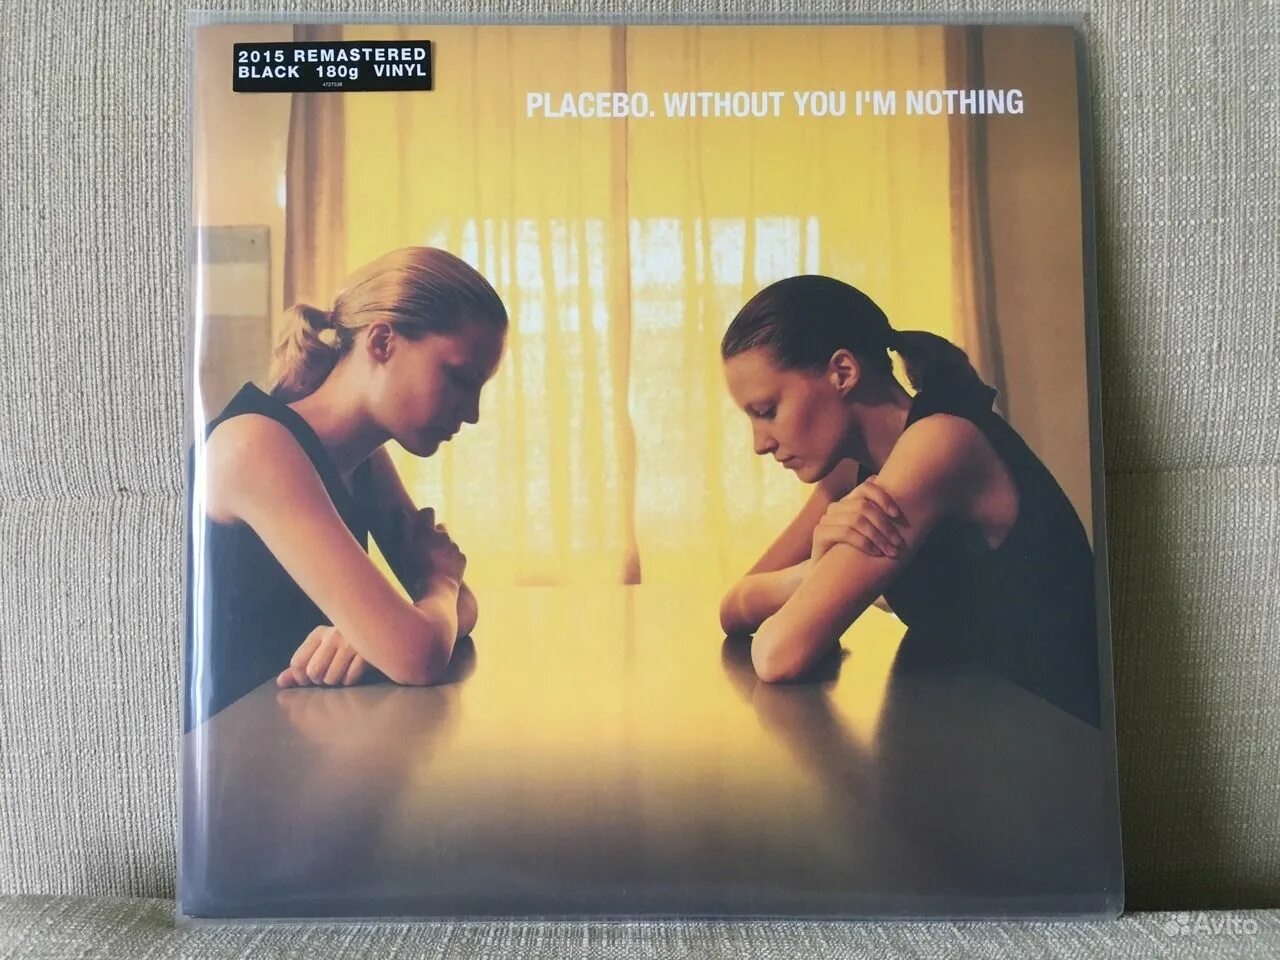 Without you only you. Placebo 1996 album. Placebo - "without you i'm nothing" (1998). Without you i'm nothing Placebo обложка. Placebo without you i'm nothing альбом.